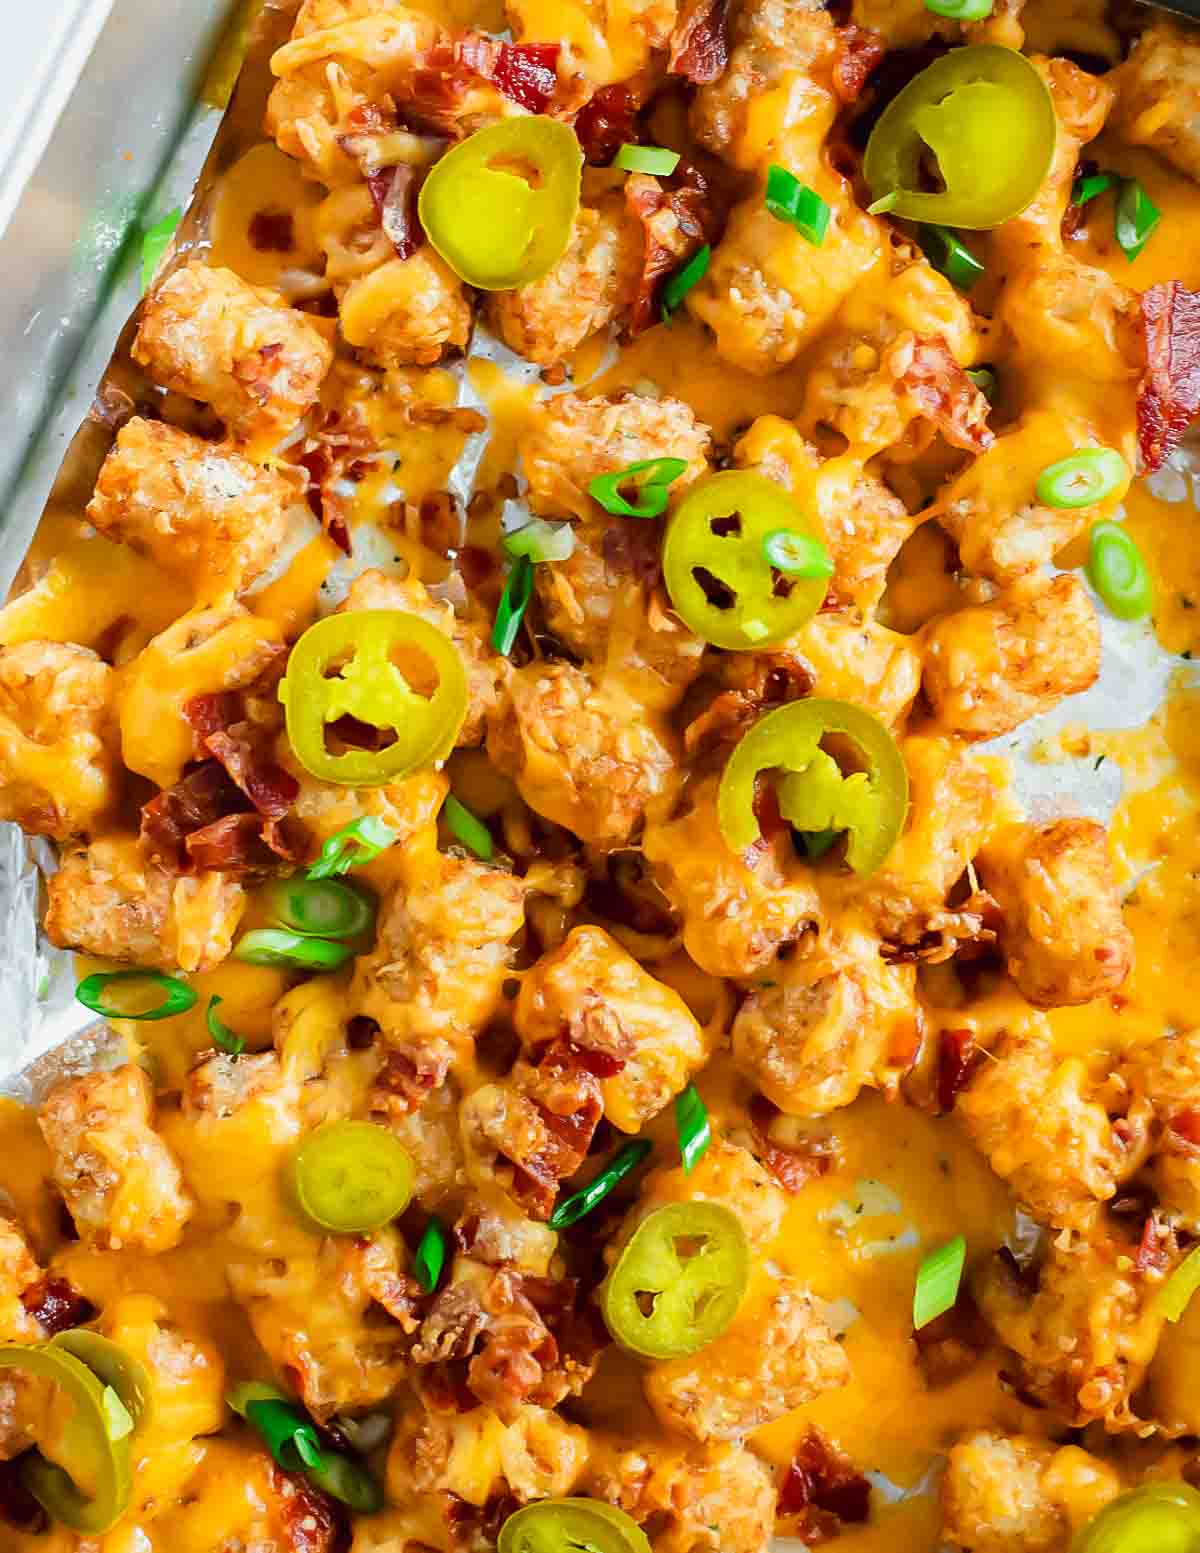 Loaded tater tots on a baking pan.